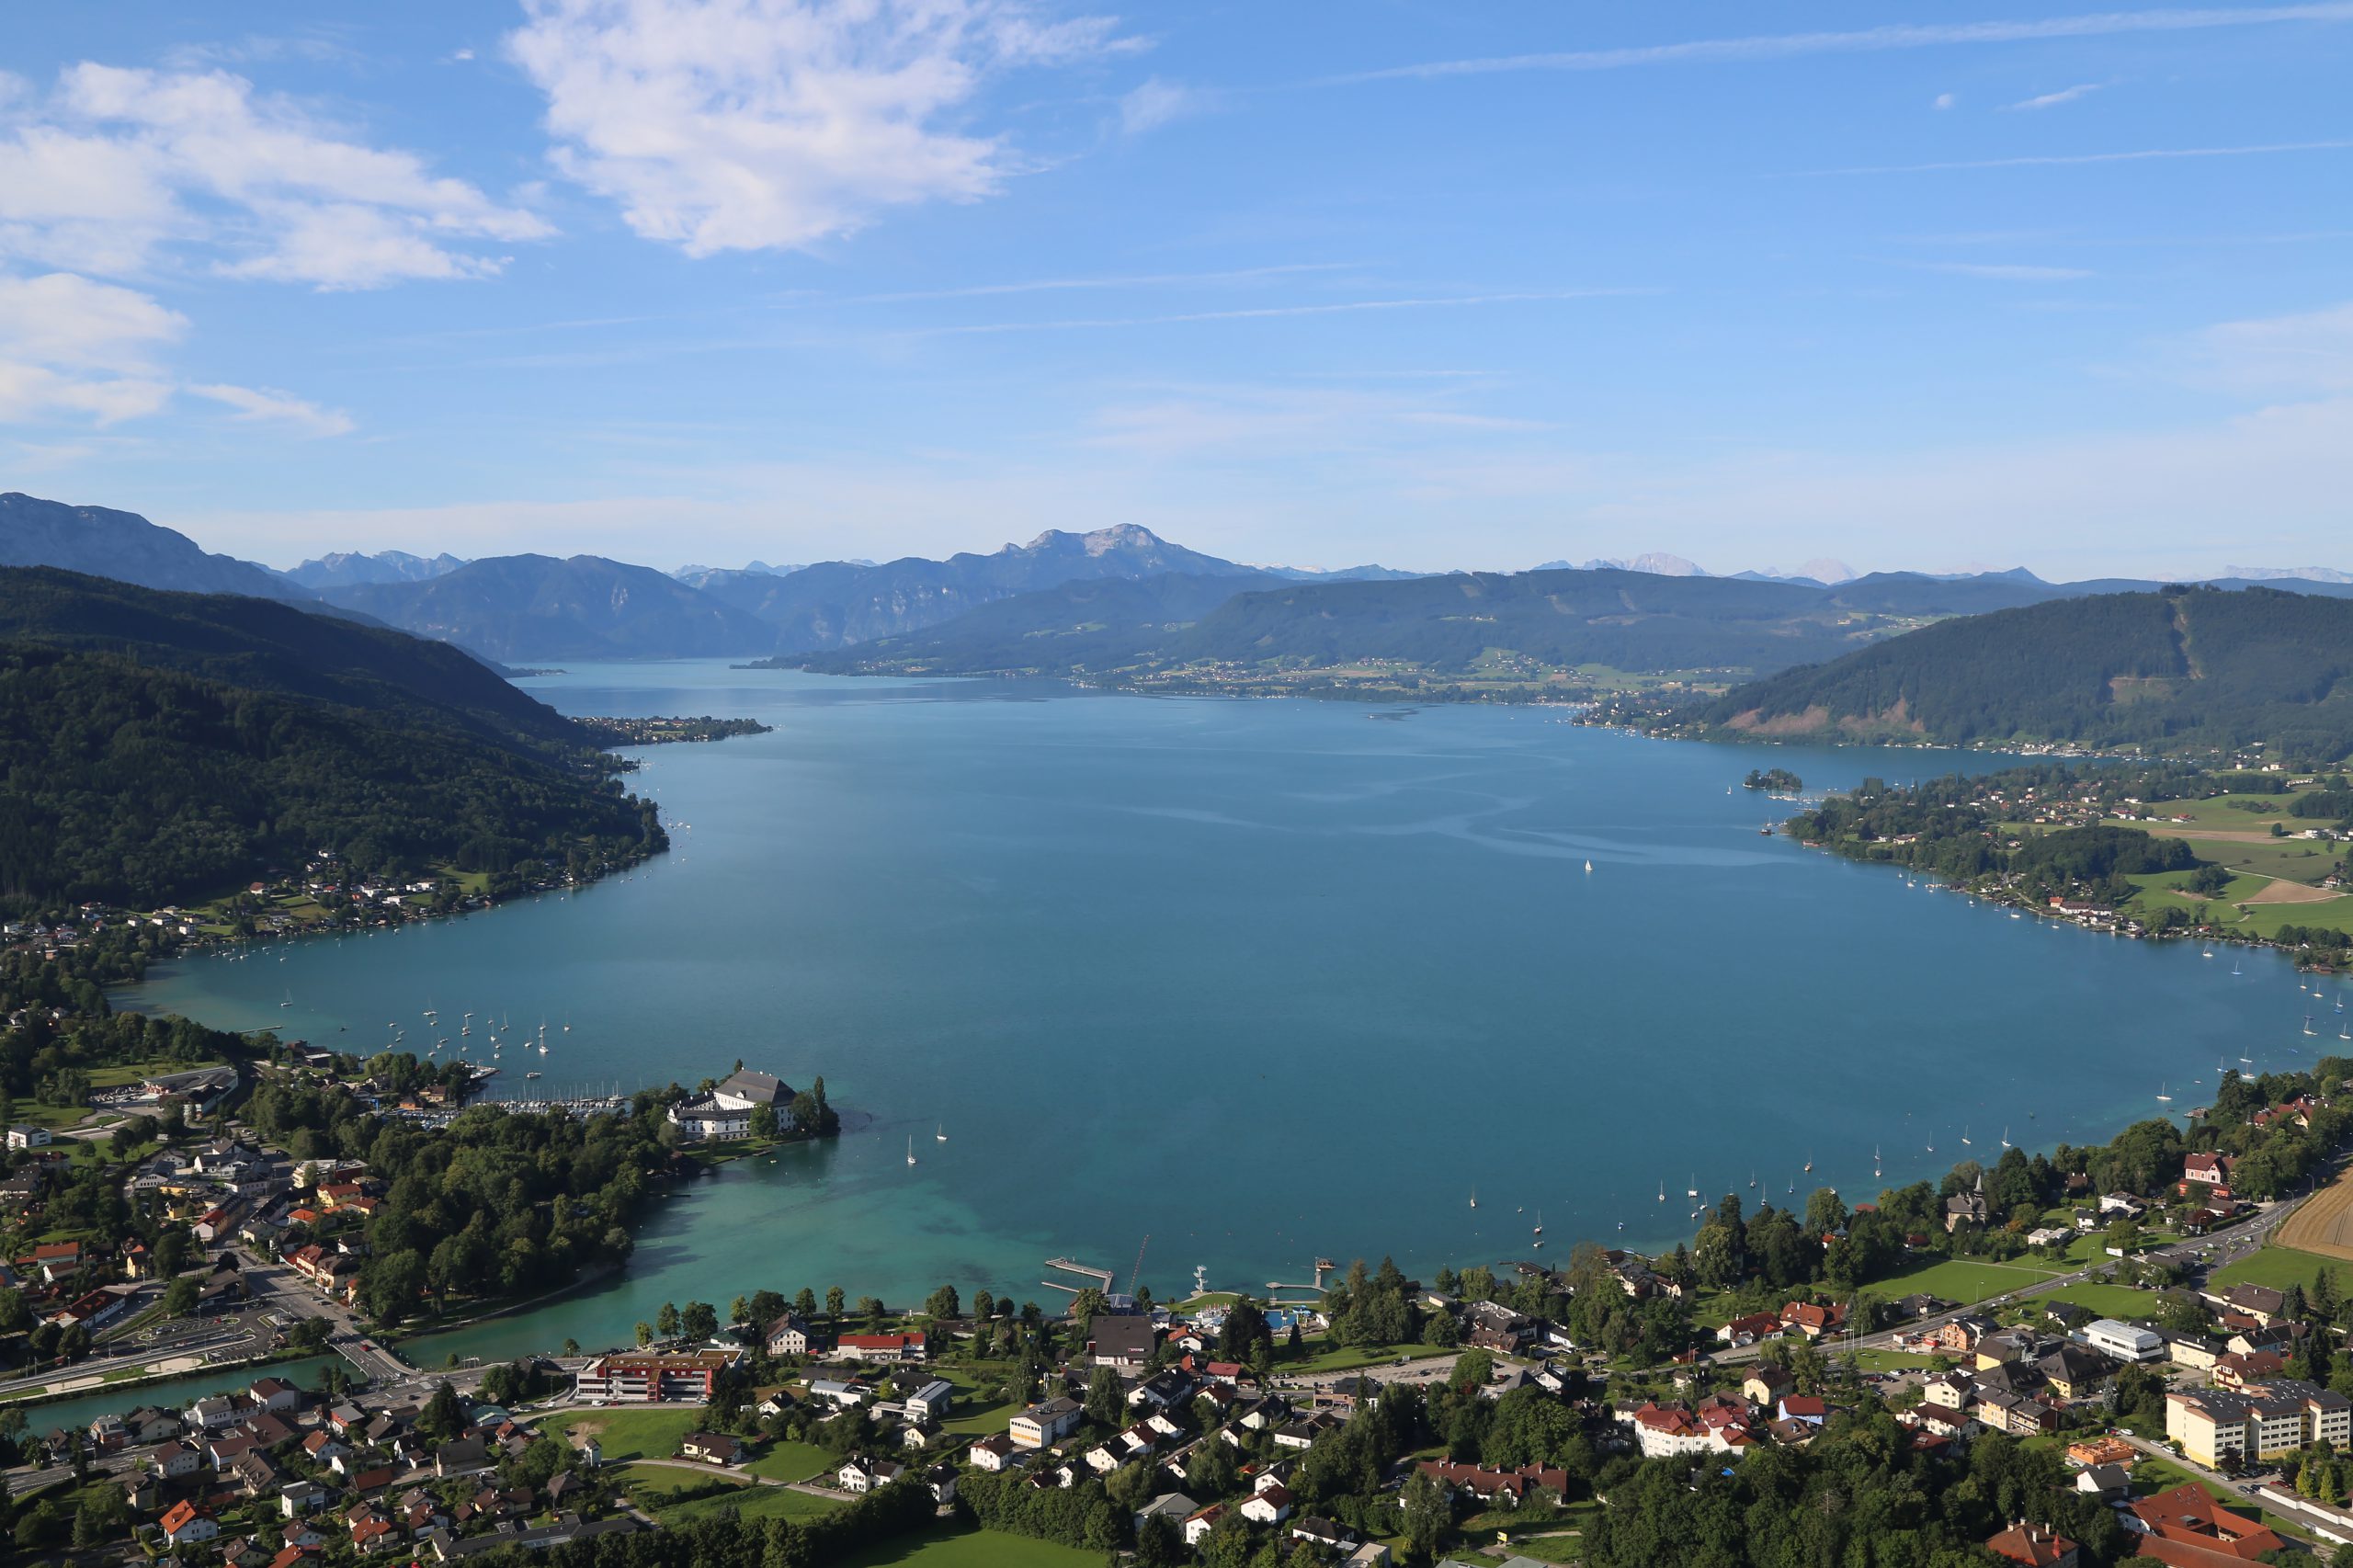 Cycling holiday in the Salzkammergut - explore the Attersee by bike